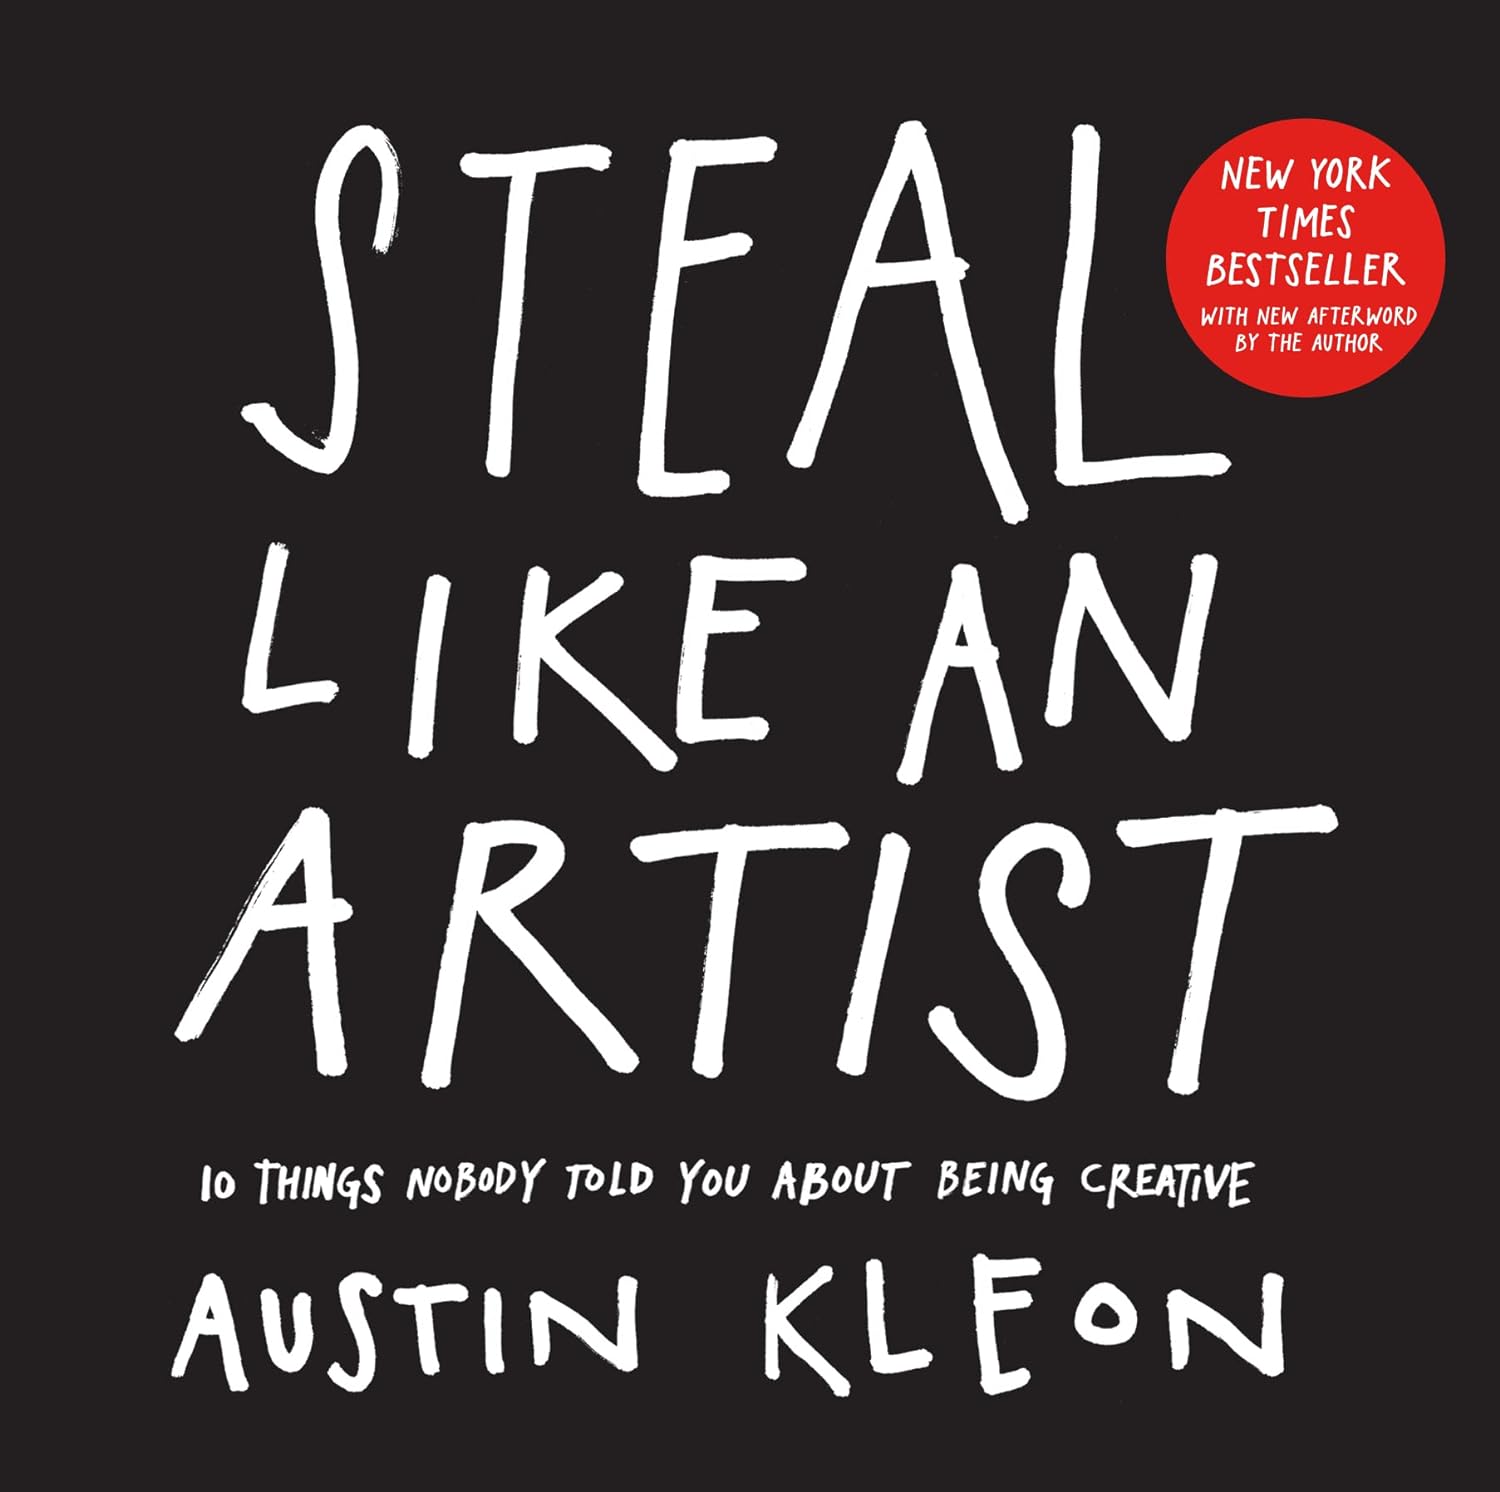 Steal Like an Artist 10 Things Nobody Told You About Being Creative by Austin Kleon